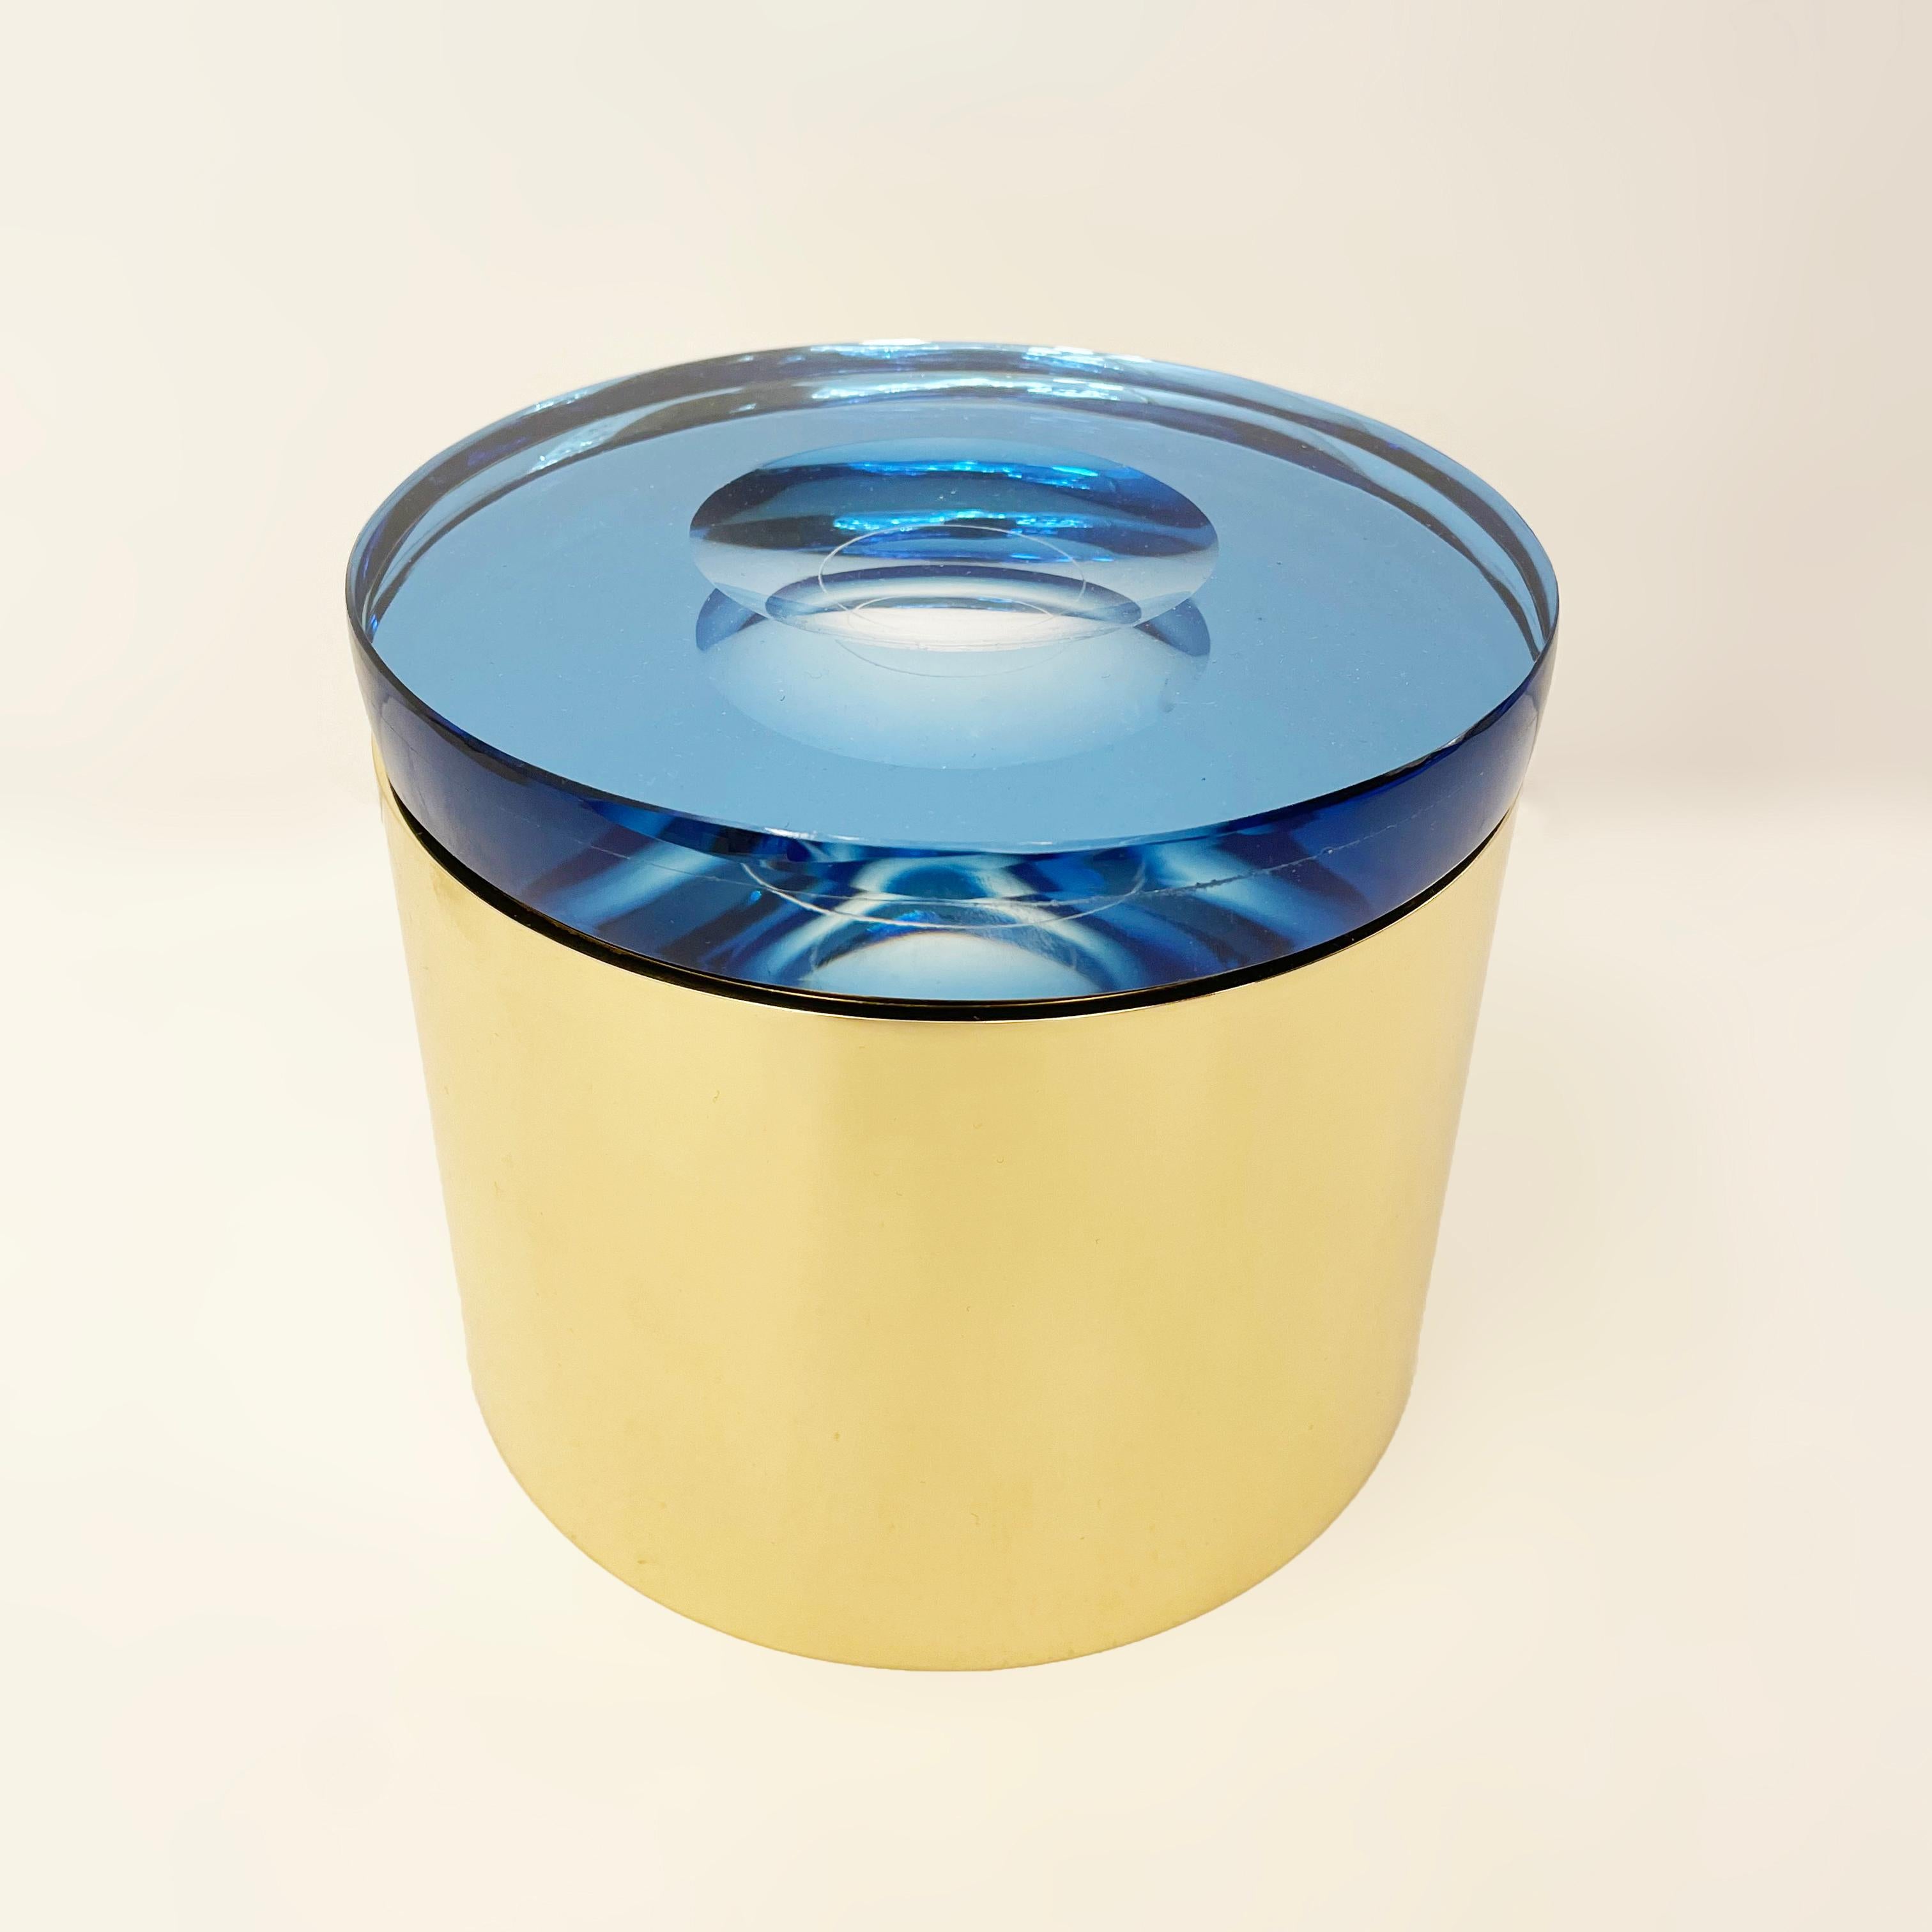 Candela Glass Box by Form A, Blue Glass and Bronze Base 1